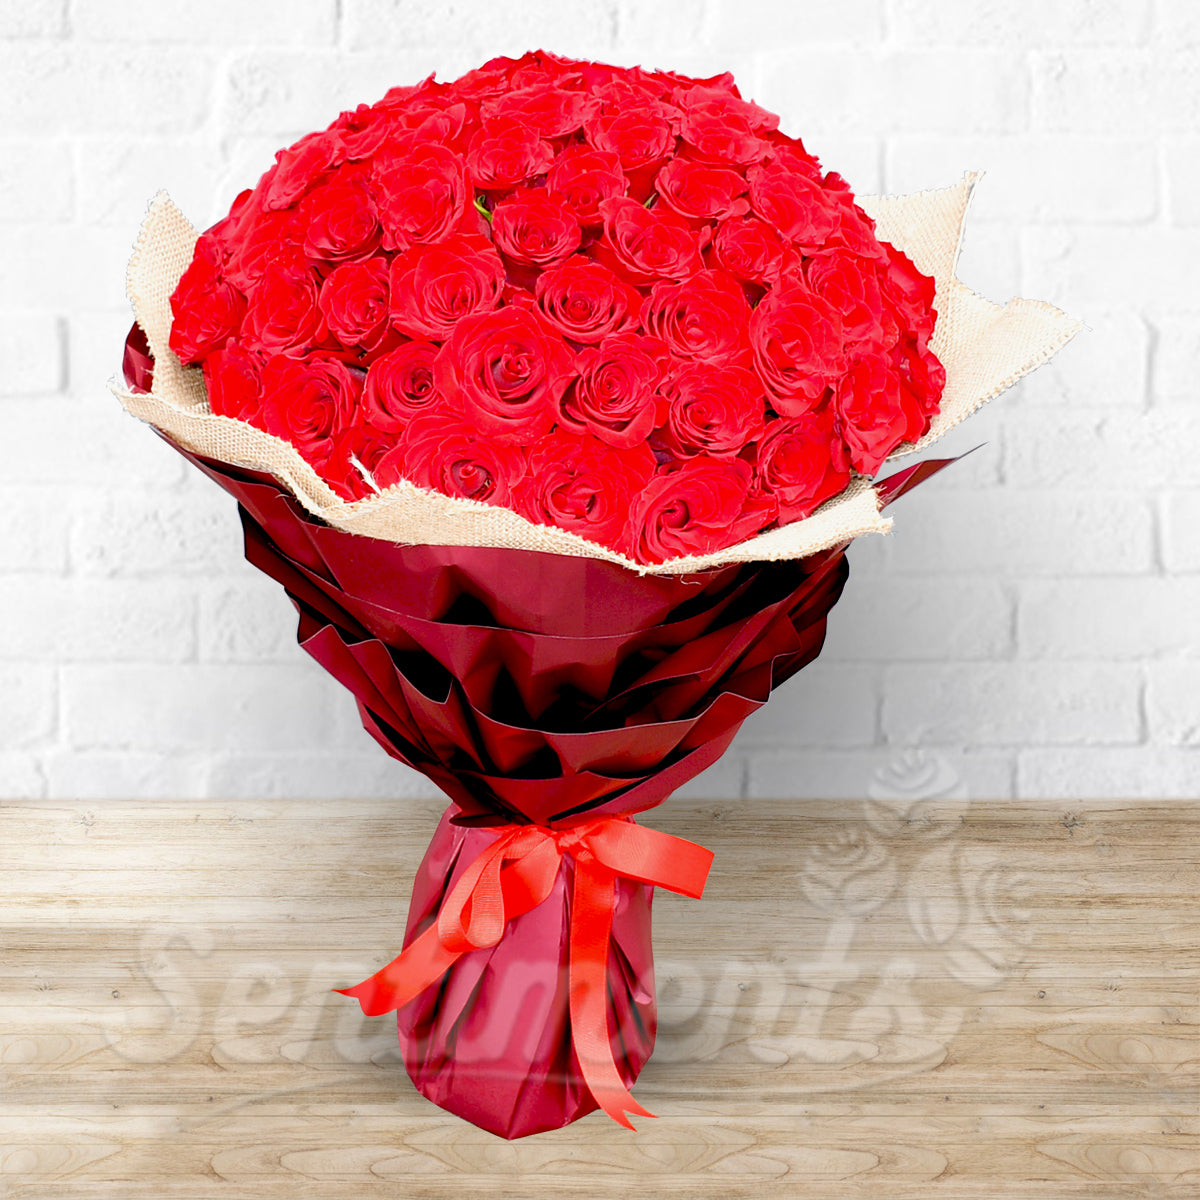 50 Red Roses Hand Bouquet